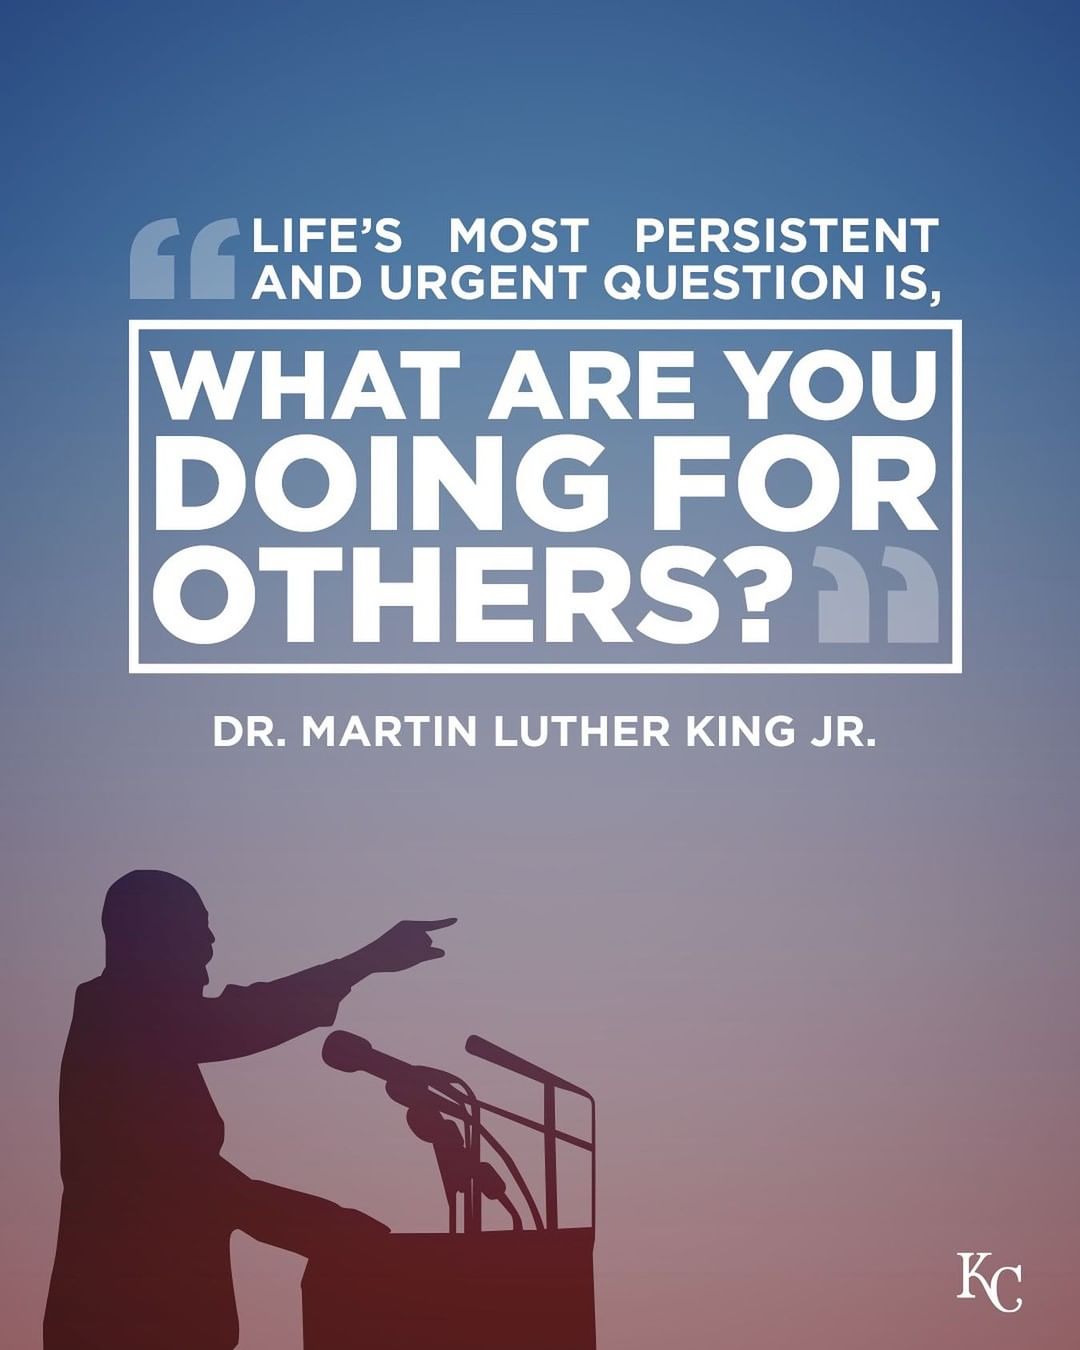 Honoring the life and legacy of Dr. Martin Luther King Jr. #MLKDay...